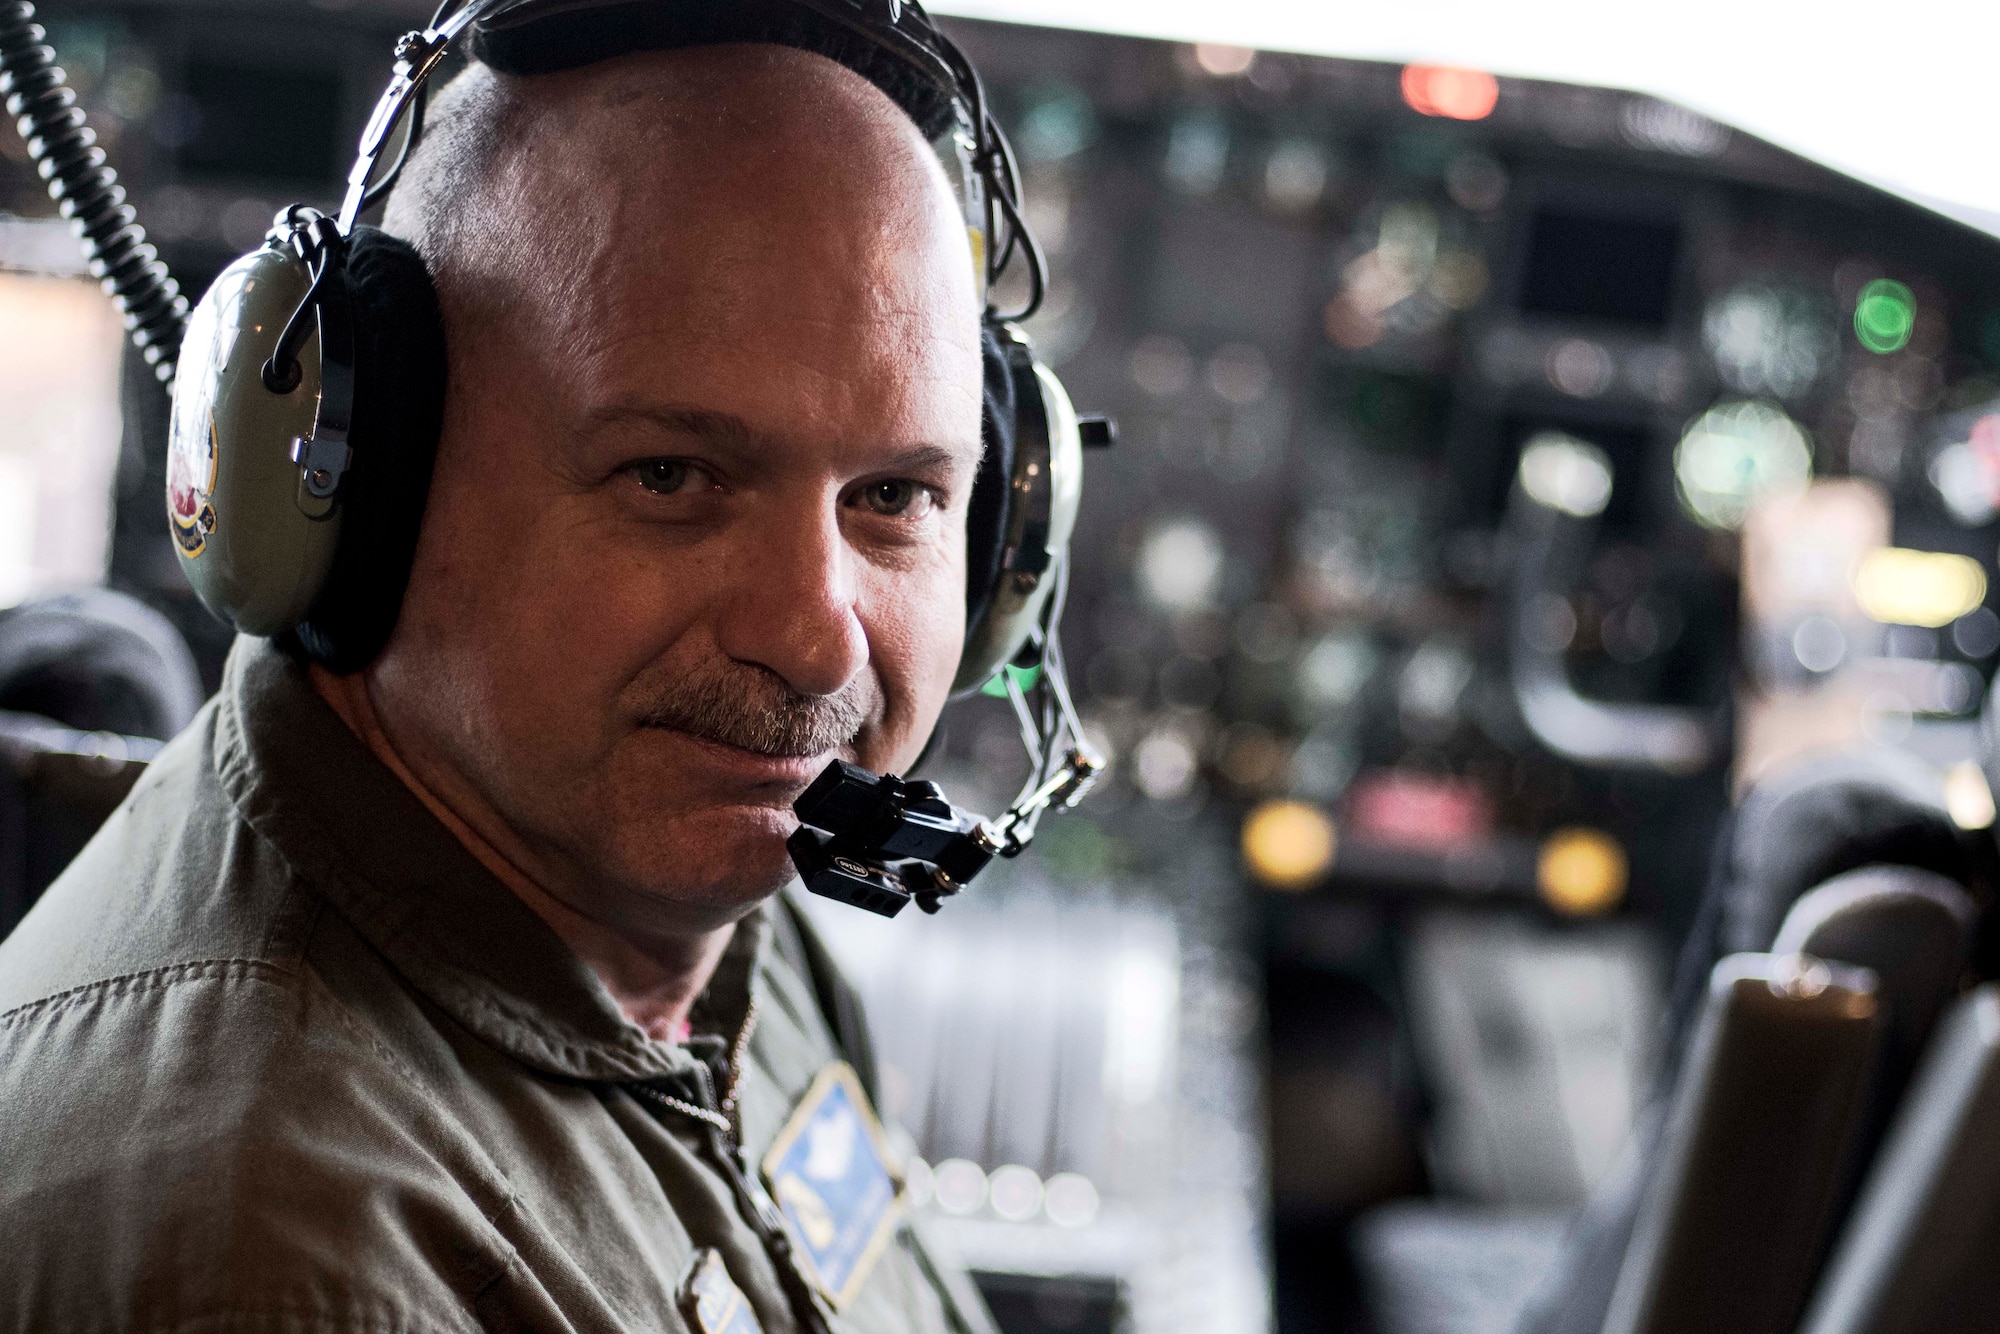 Chief Master Sgt. Terry Studstill, 700th Airlift Squadron flight engineer superintendent, poses for a photo in a C-130H3 Hercules at Dobbins Air Reserve Base, Ga. on Nov. 22, 2019. A couple days later, he reached 10,000 flight hours - a major accomplishment for aviators. (U.S. Air Force photo/Tech. Sgt. Andrew Park)